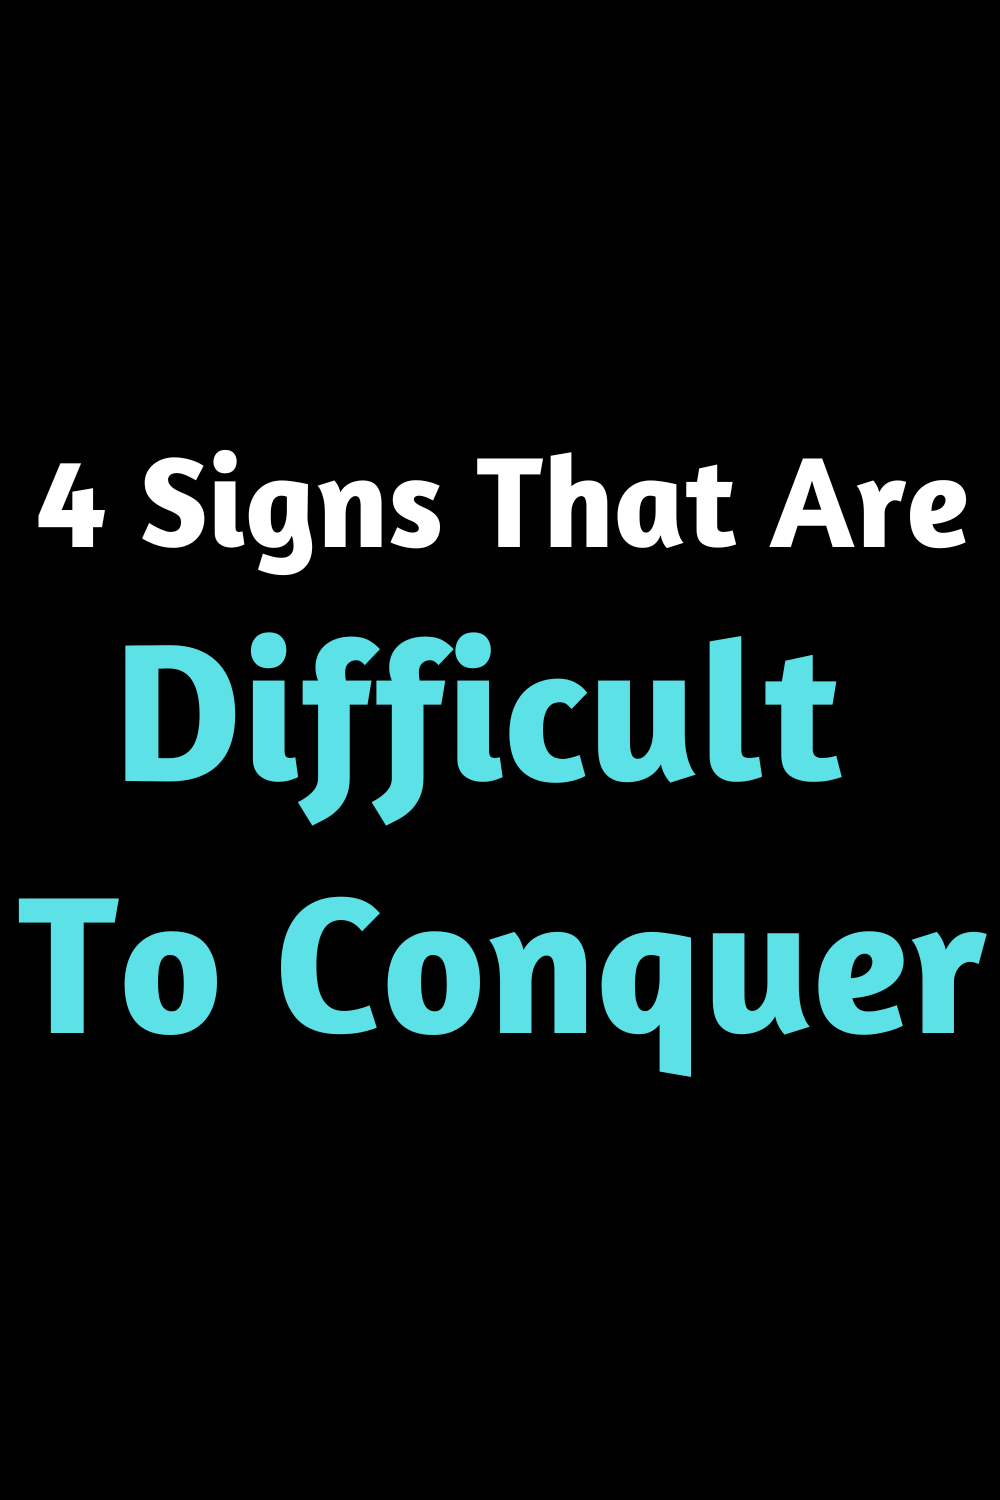 4 Signs That Are Difficult To Conquer